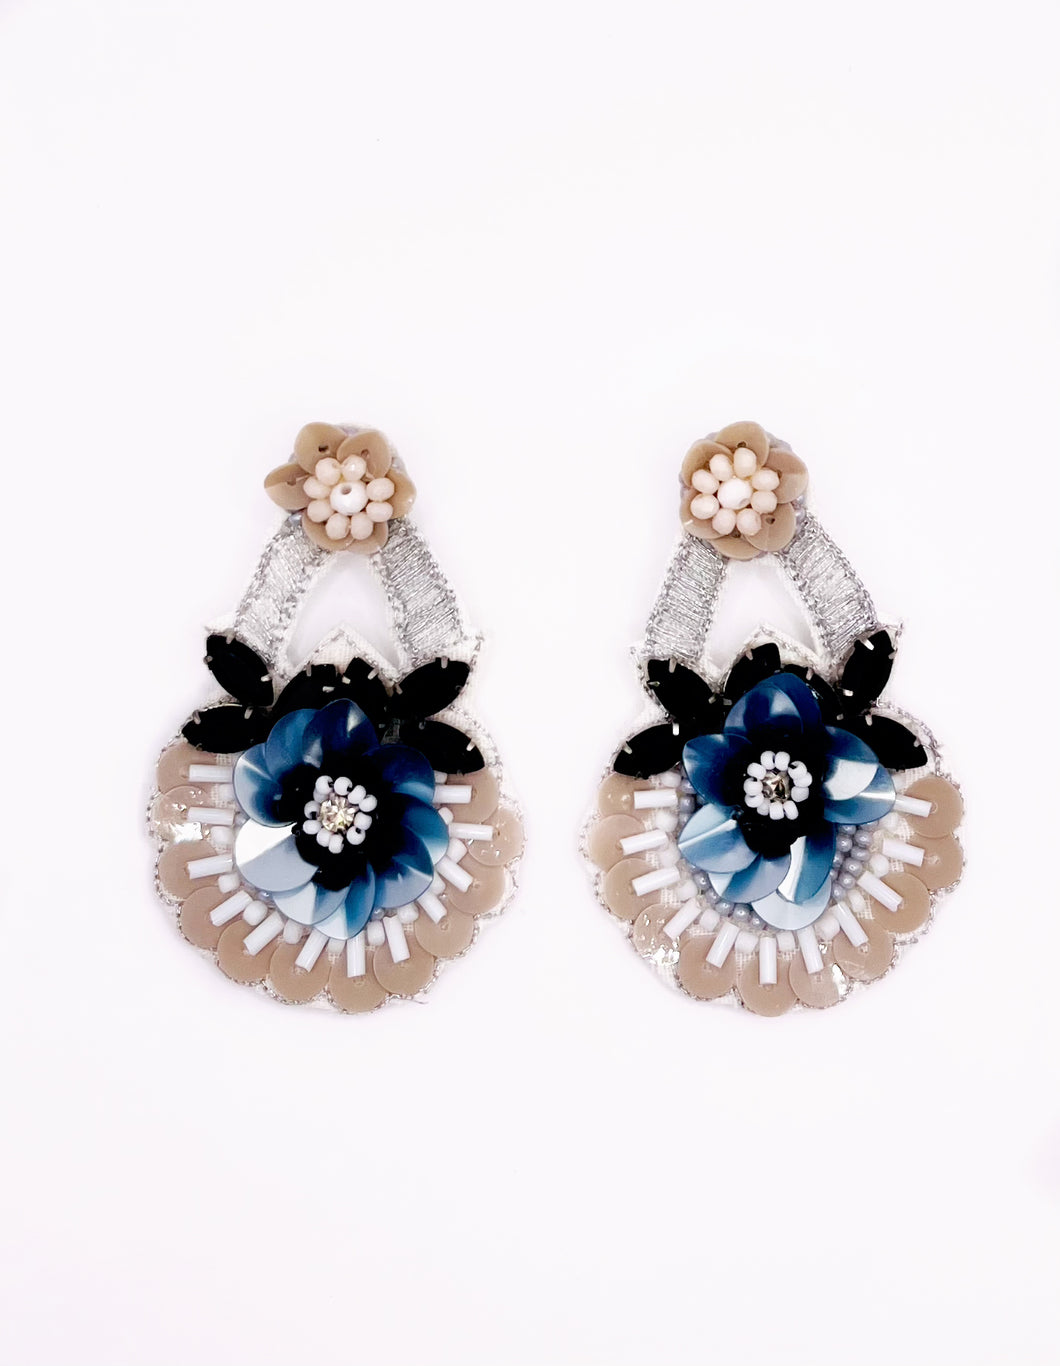 Floral Boho Statement Earrings Blue, Black and Tan/ flowers